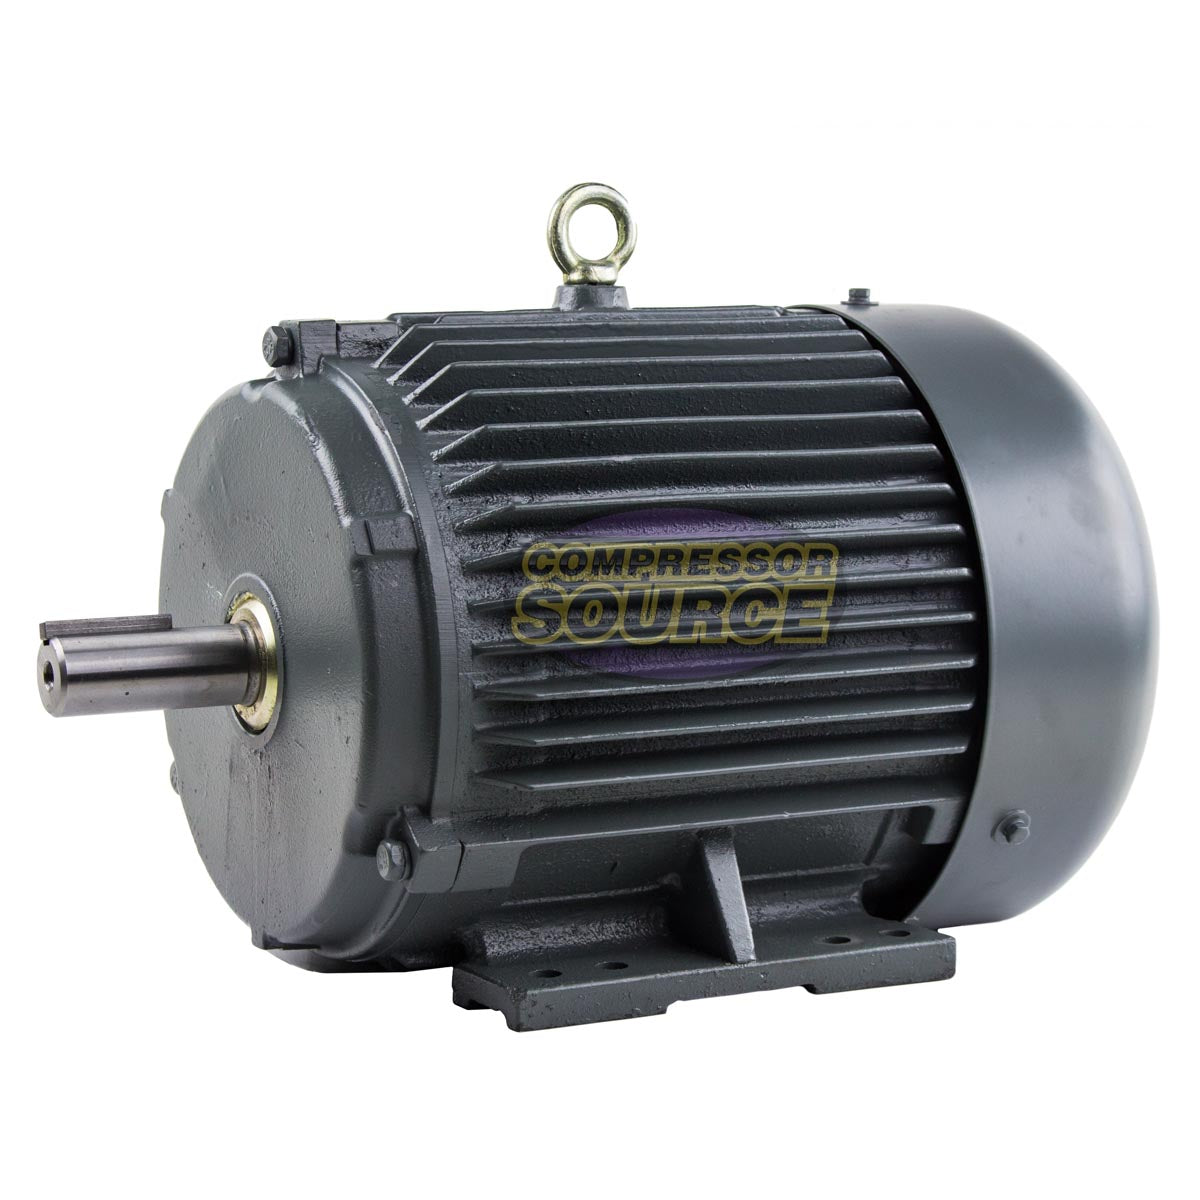 5 HP 3 Phase Electric Motor 1800 RPM 184T Frame TEFC 230/460 Volt Severe Duty